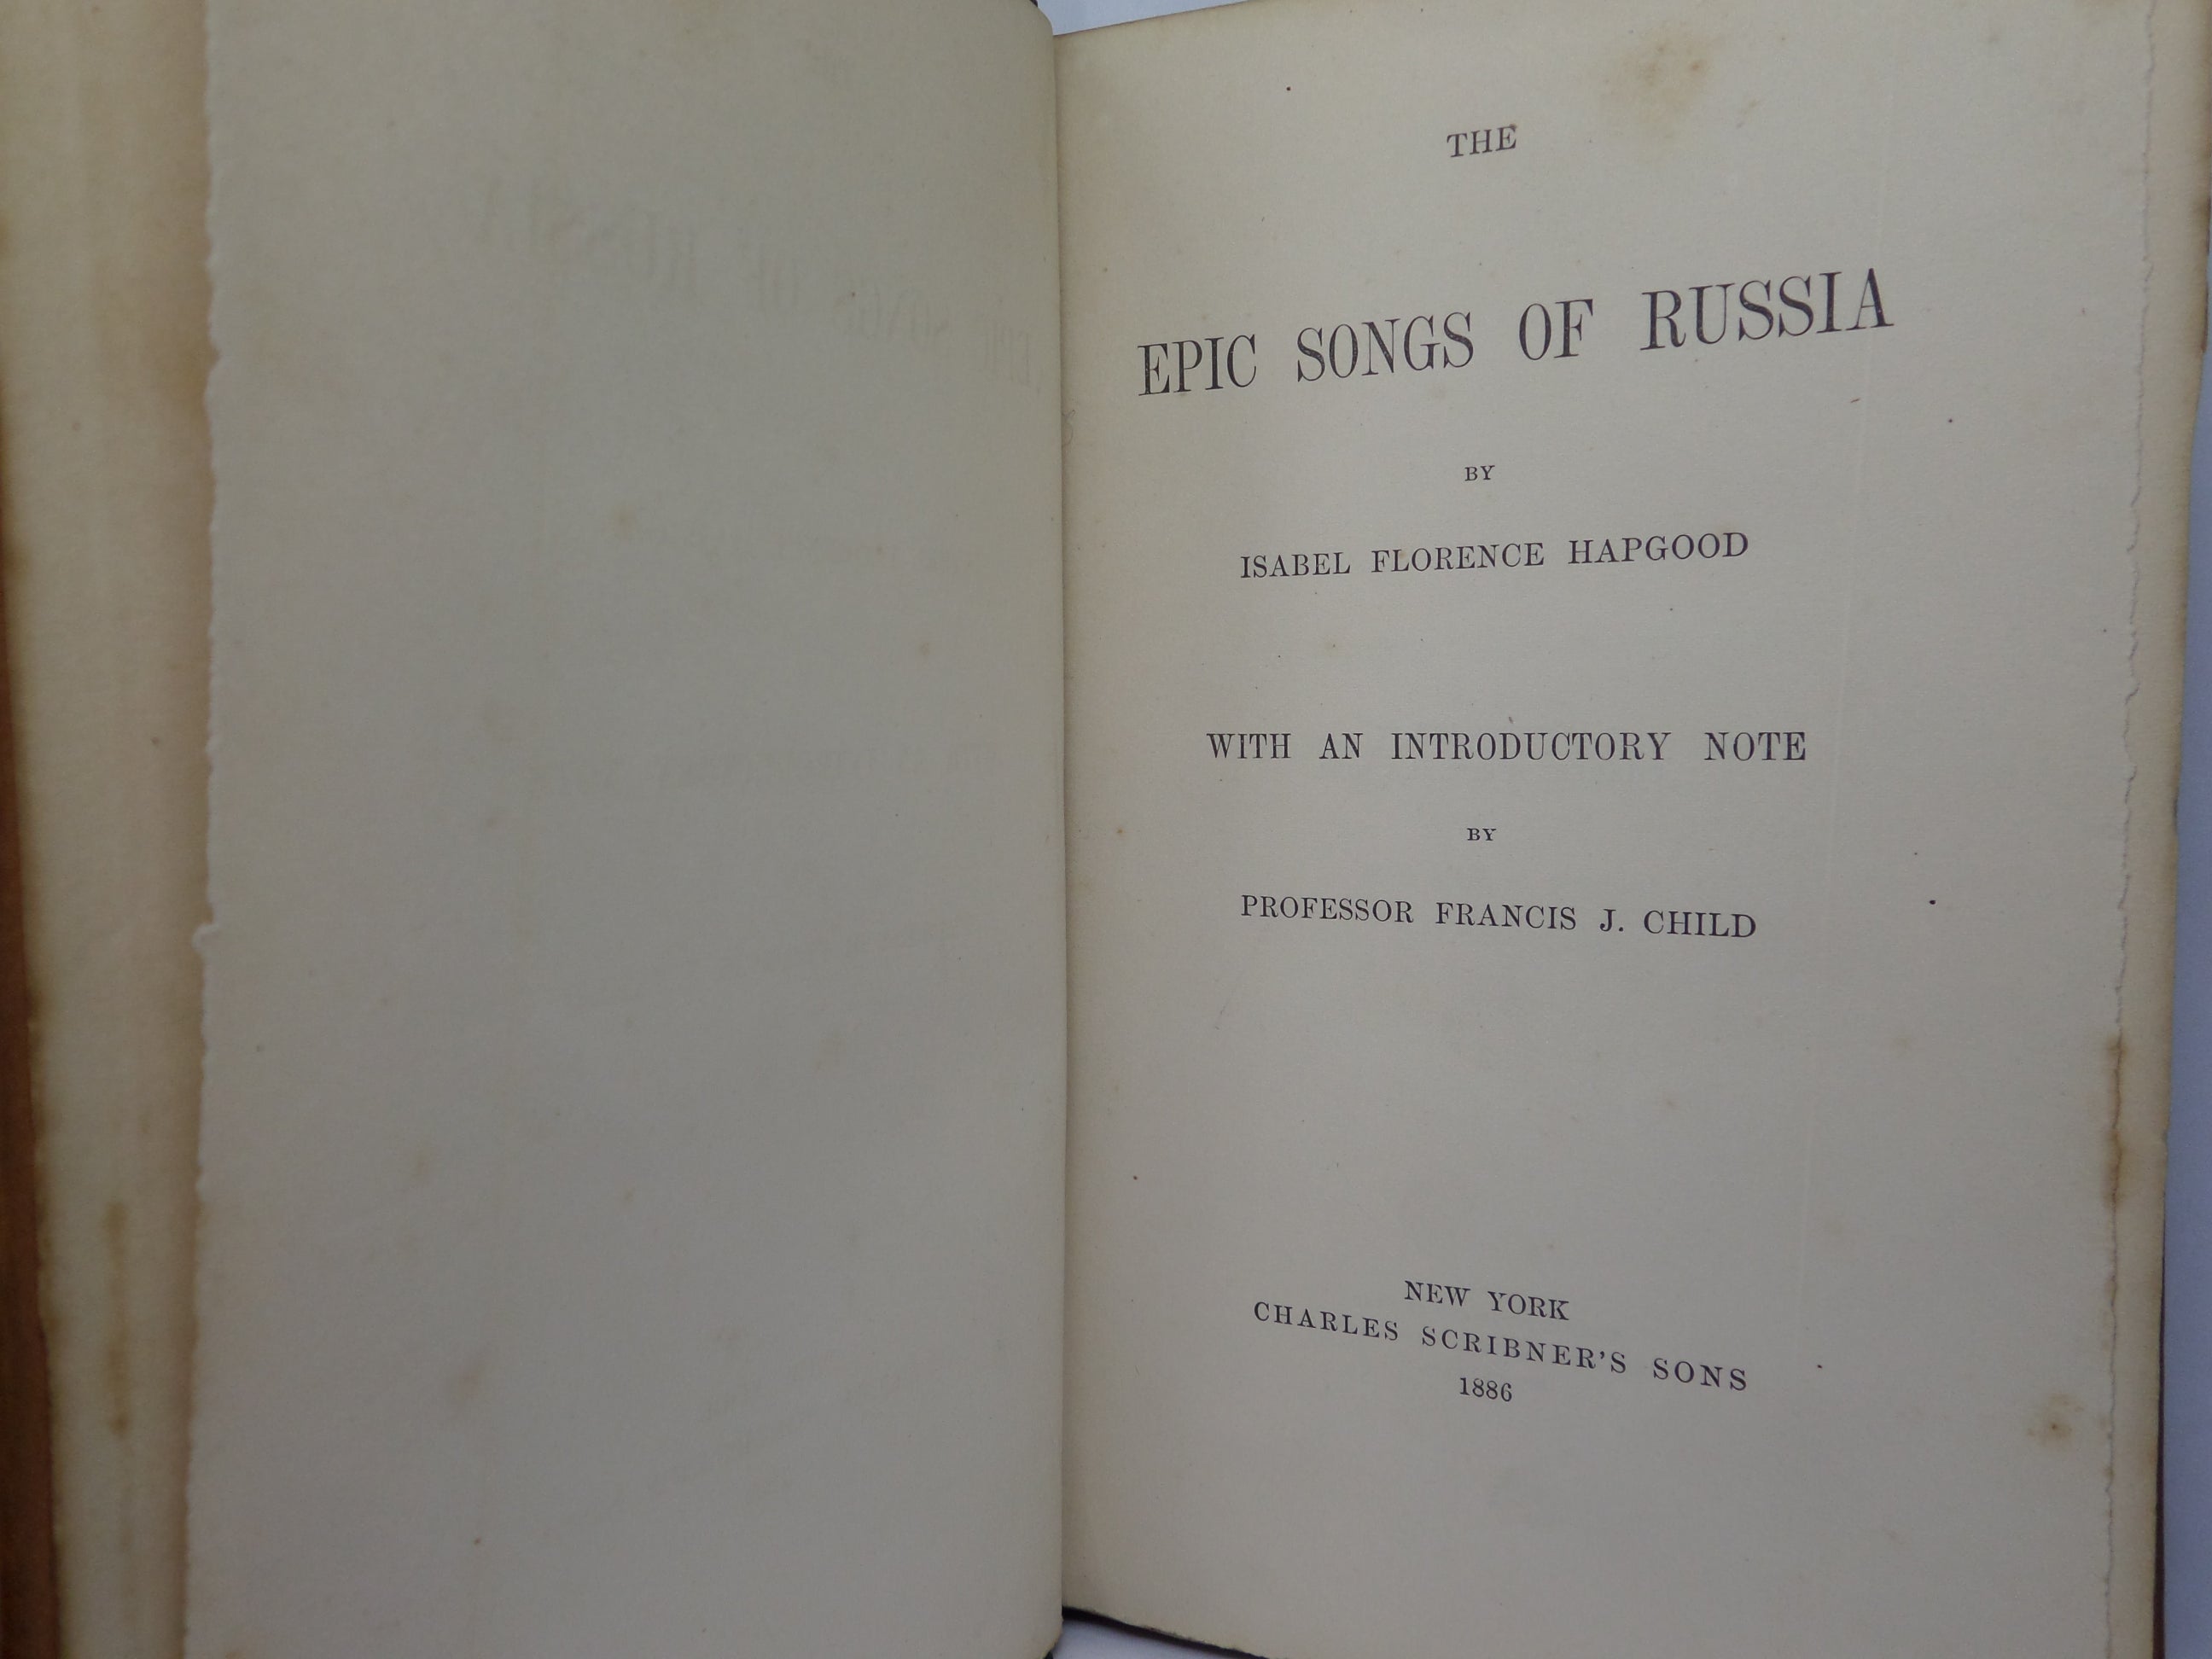 THE EPIC SONGS OF RUSSIA BY ISABEL FLORENCE HAPGOOD 1886